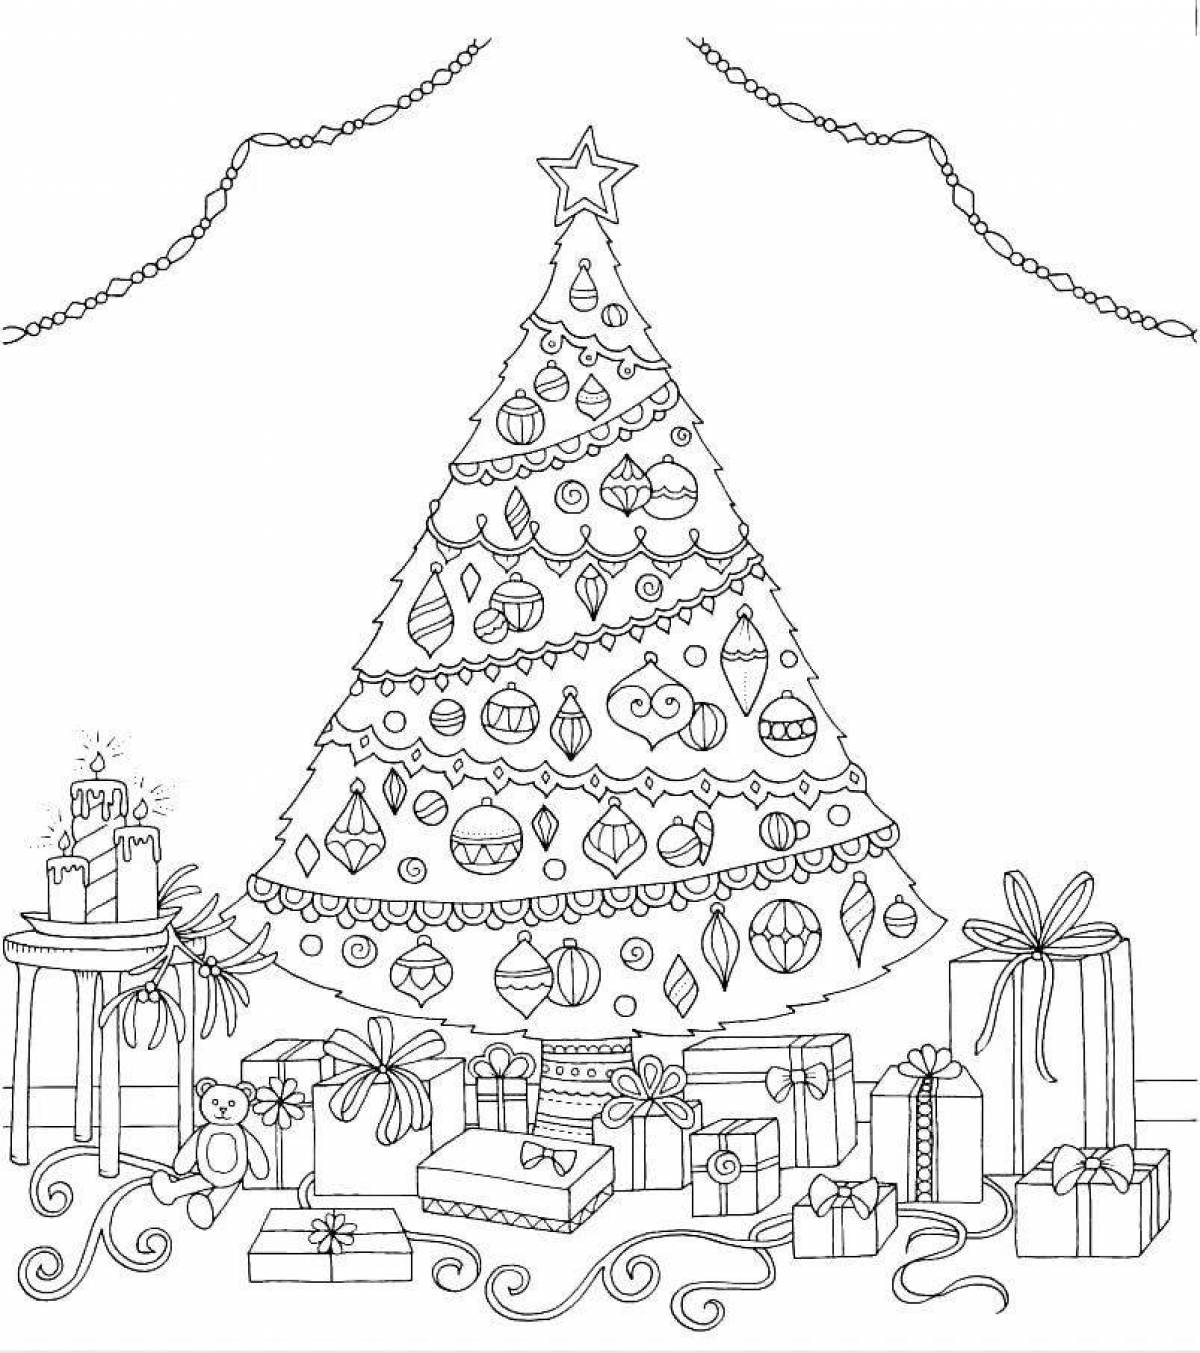 Exquisite Christmas tree with gifts